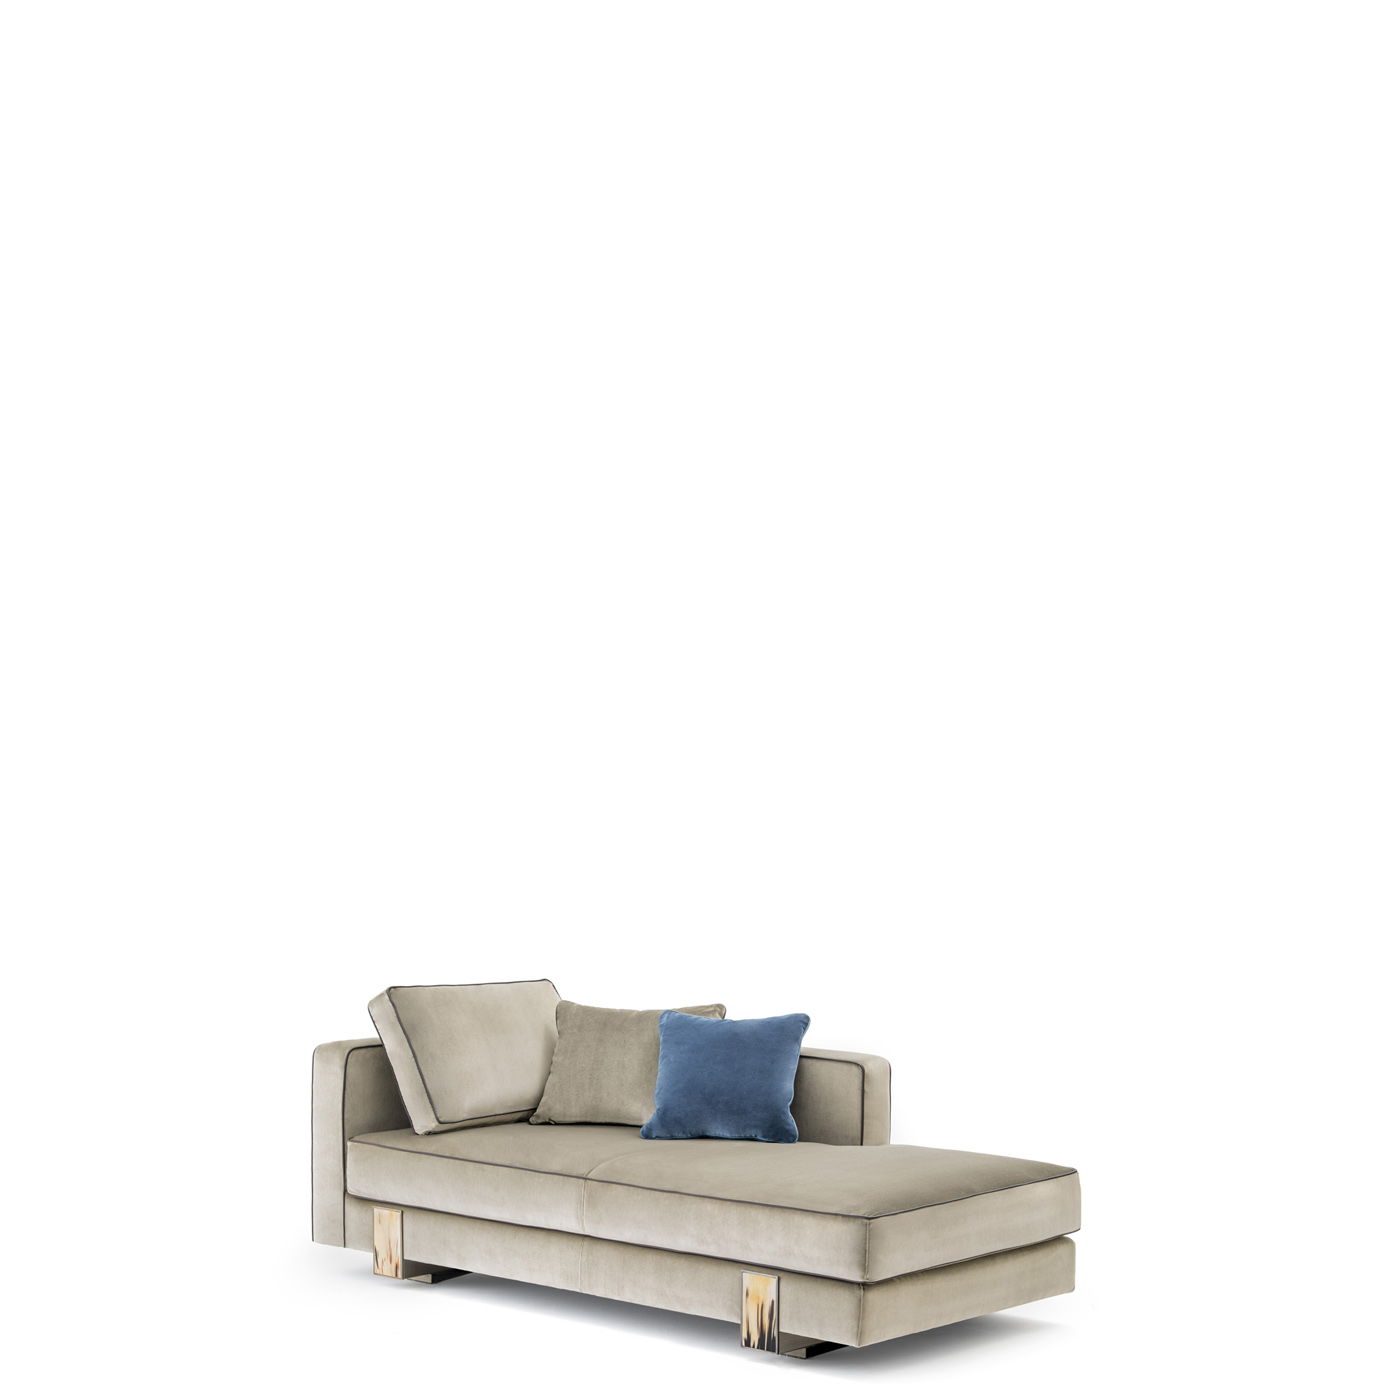 Sofas and seats - Adriano chaise longue in Lario velvet with horn details - side view - Arcahorn